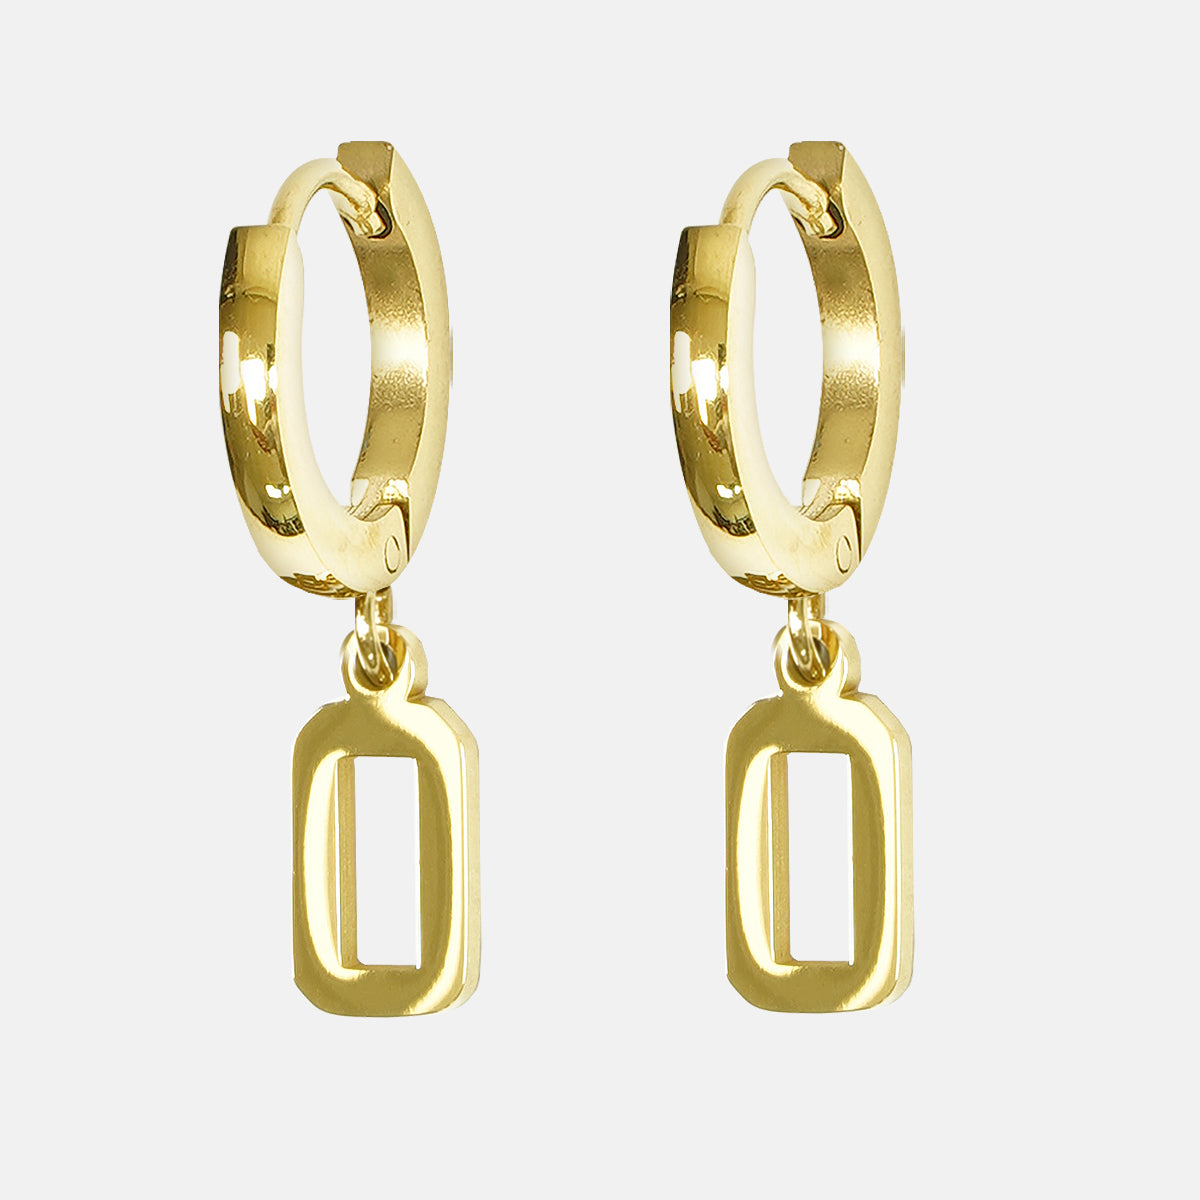 0 Number Earring - Gold Plated Stainless Steel